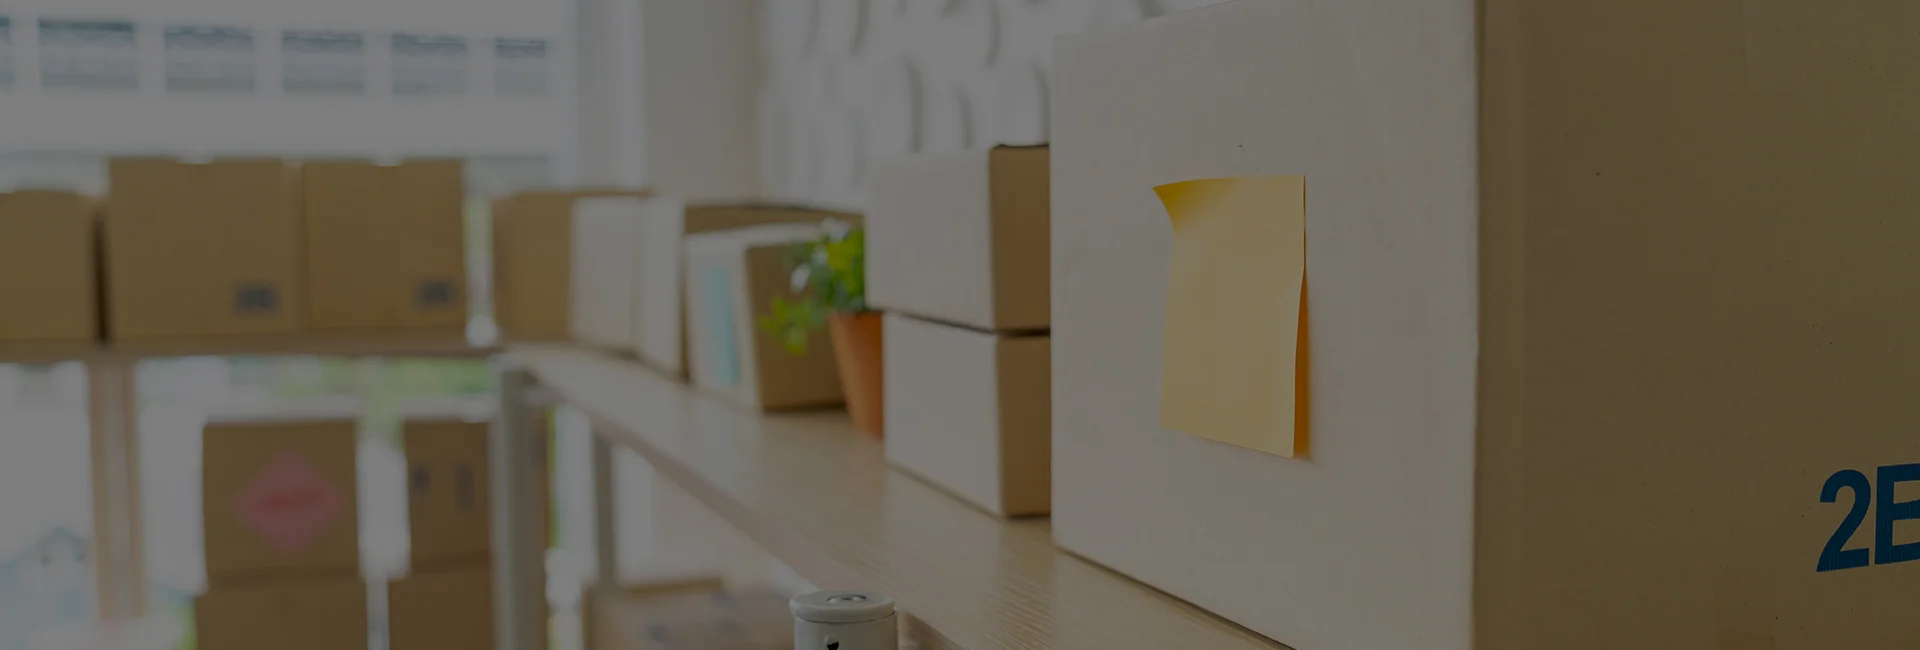 The Best Way to Label and Organize Boxes During an Office Relocation - Earthrelo